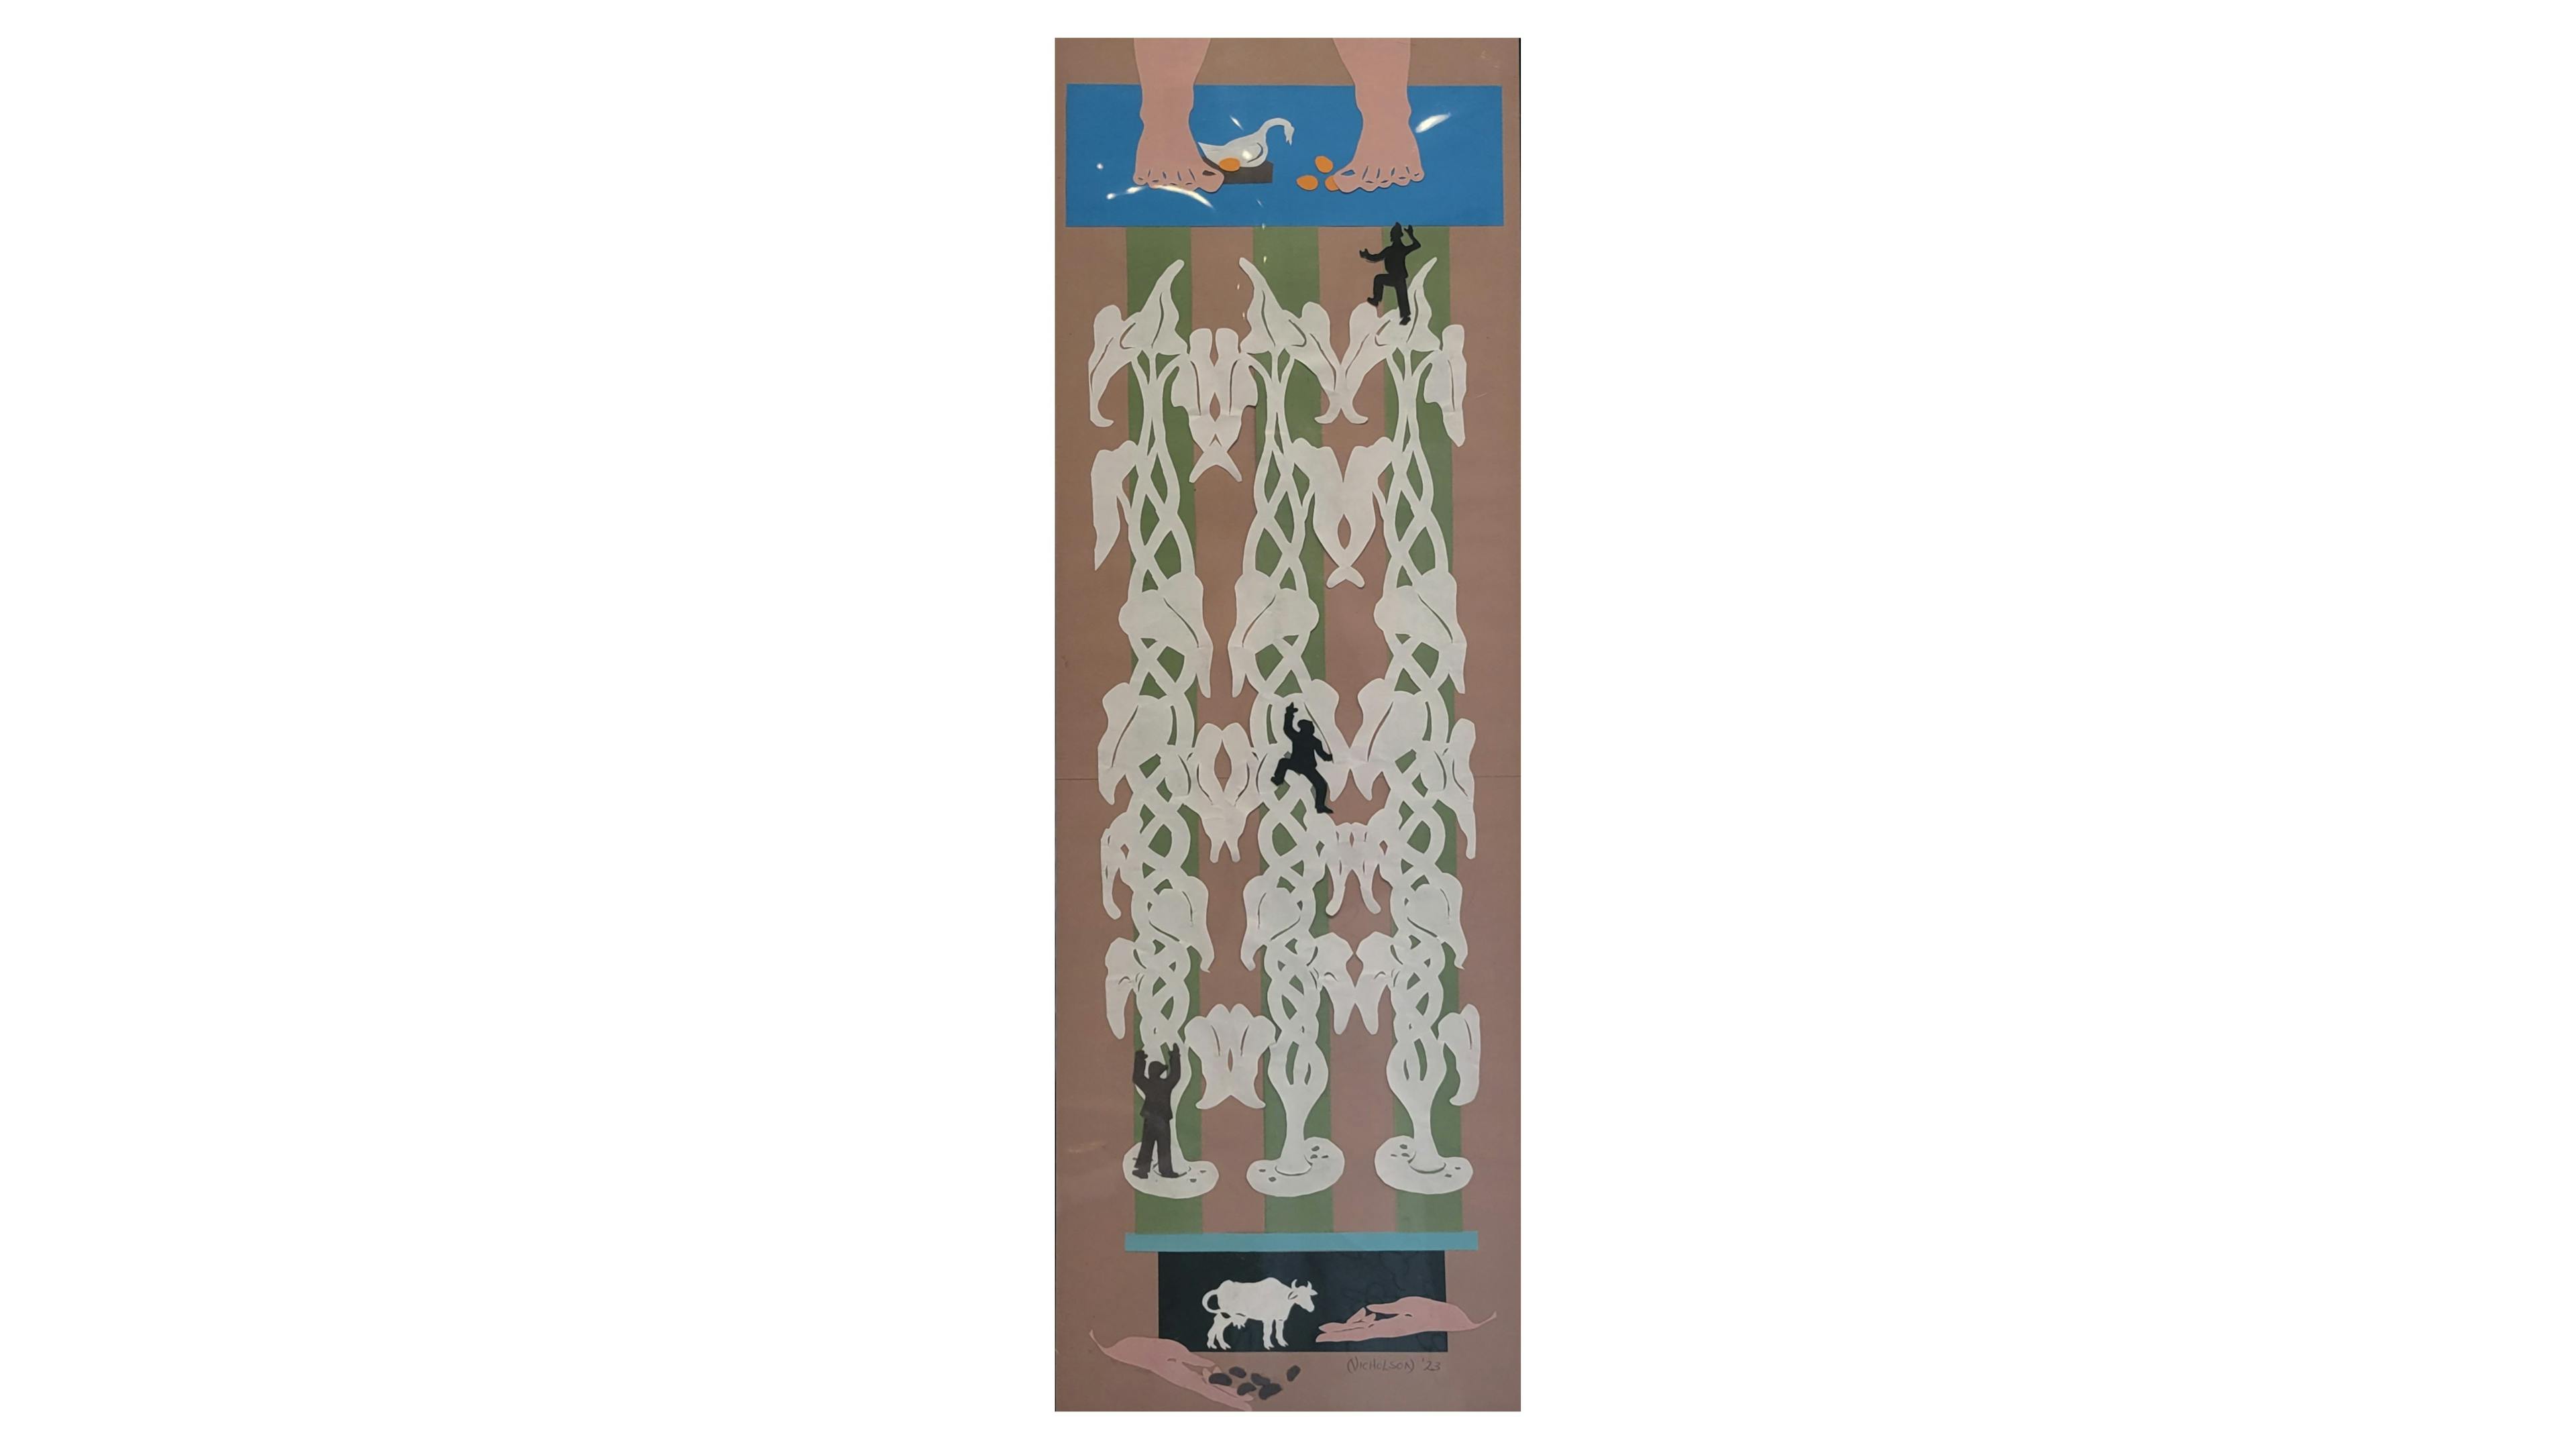 Paper cutting depicts Jack trading the family ox for magic beans, Jack climbing the beanstalk, and Jack reaching the top to find the giant, the goose and the golden egg. This paper cutting uses brown, tan, black, white, green and sky blue papers. 